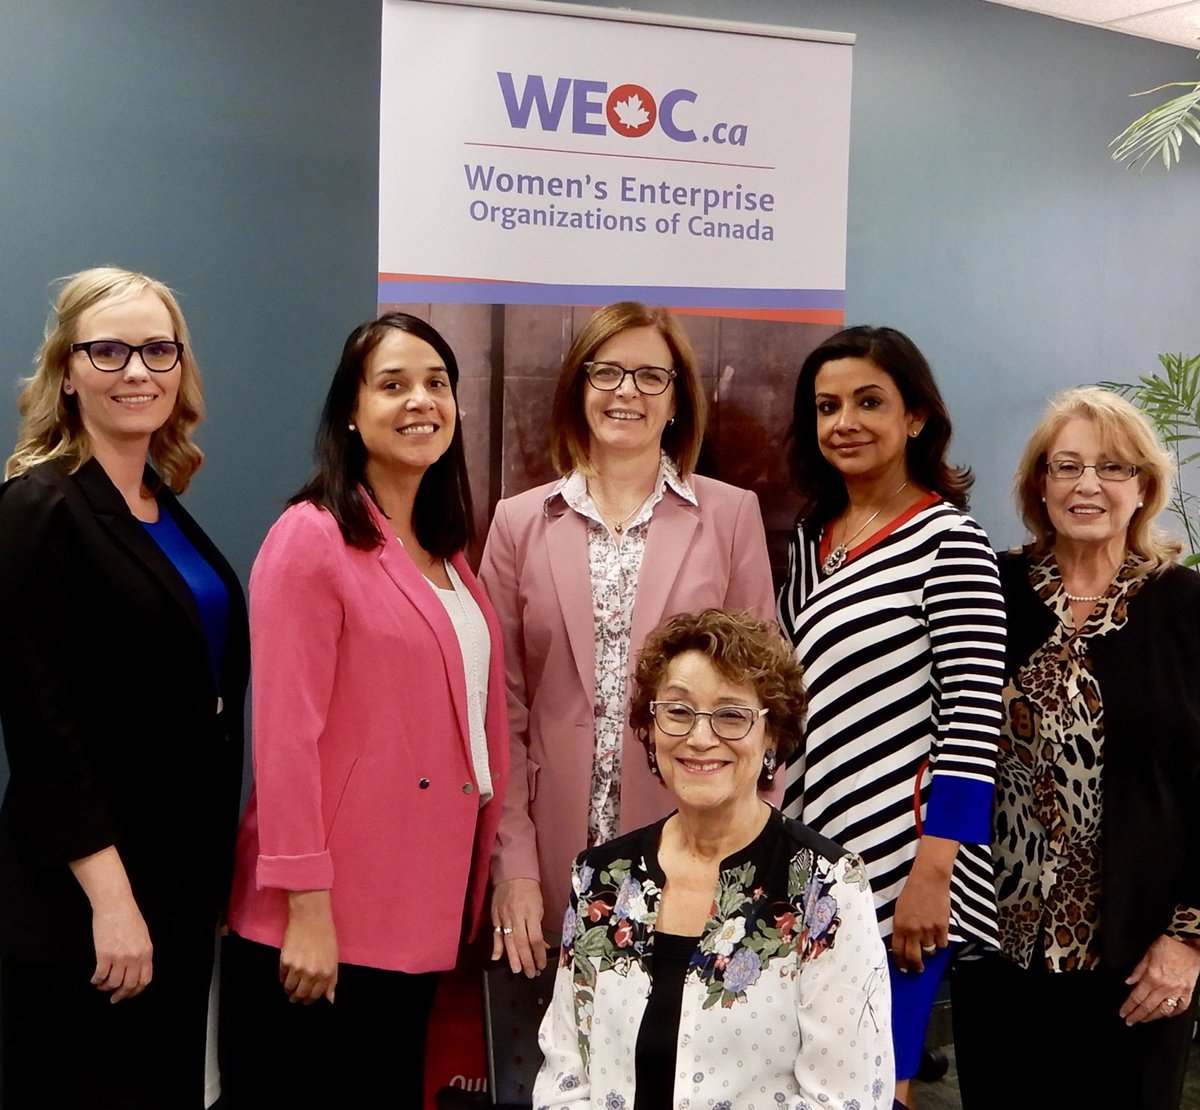 Women's Enterprise Organizations of Canada has received funding to establish a national office